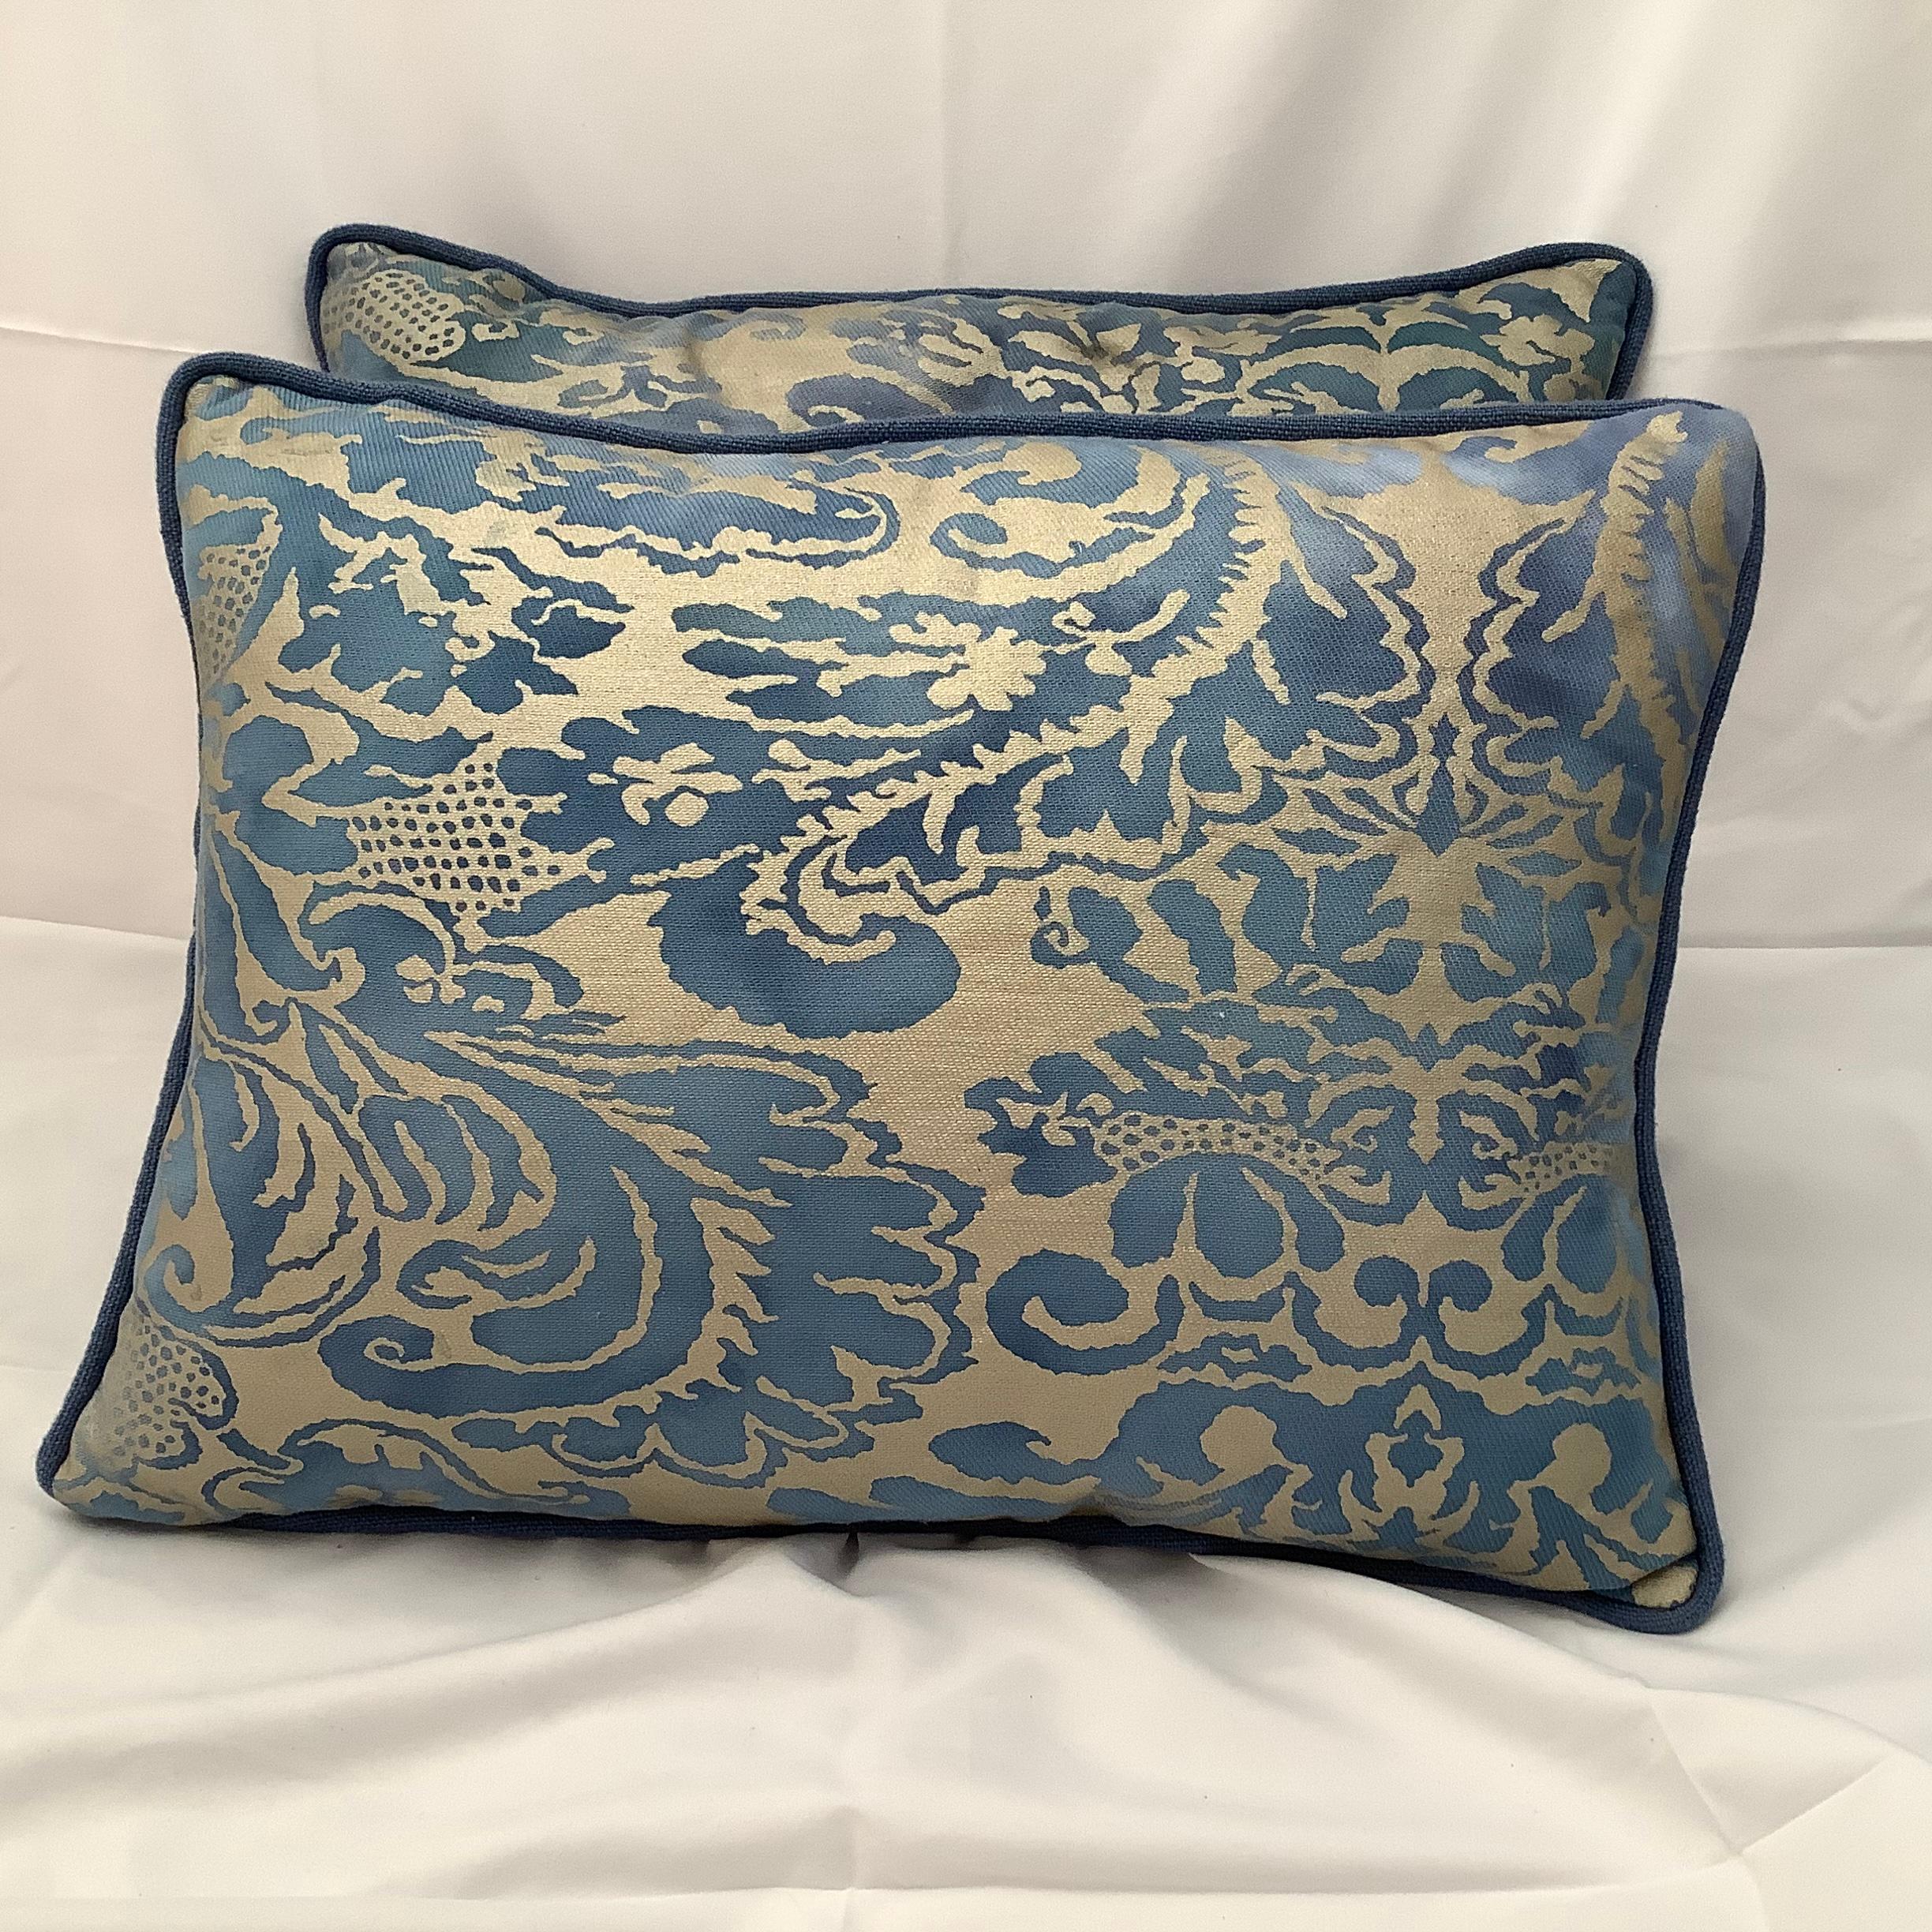 Pair of custom Fortuny textile pillows in dark blue & silver gold fronts and a coordinating dark blue linen back with self cording. Down inserts, sewn closed.